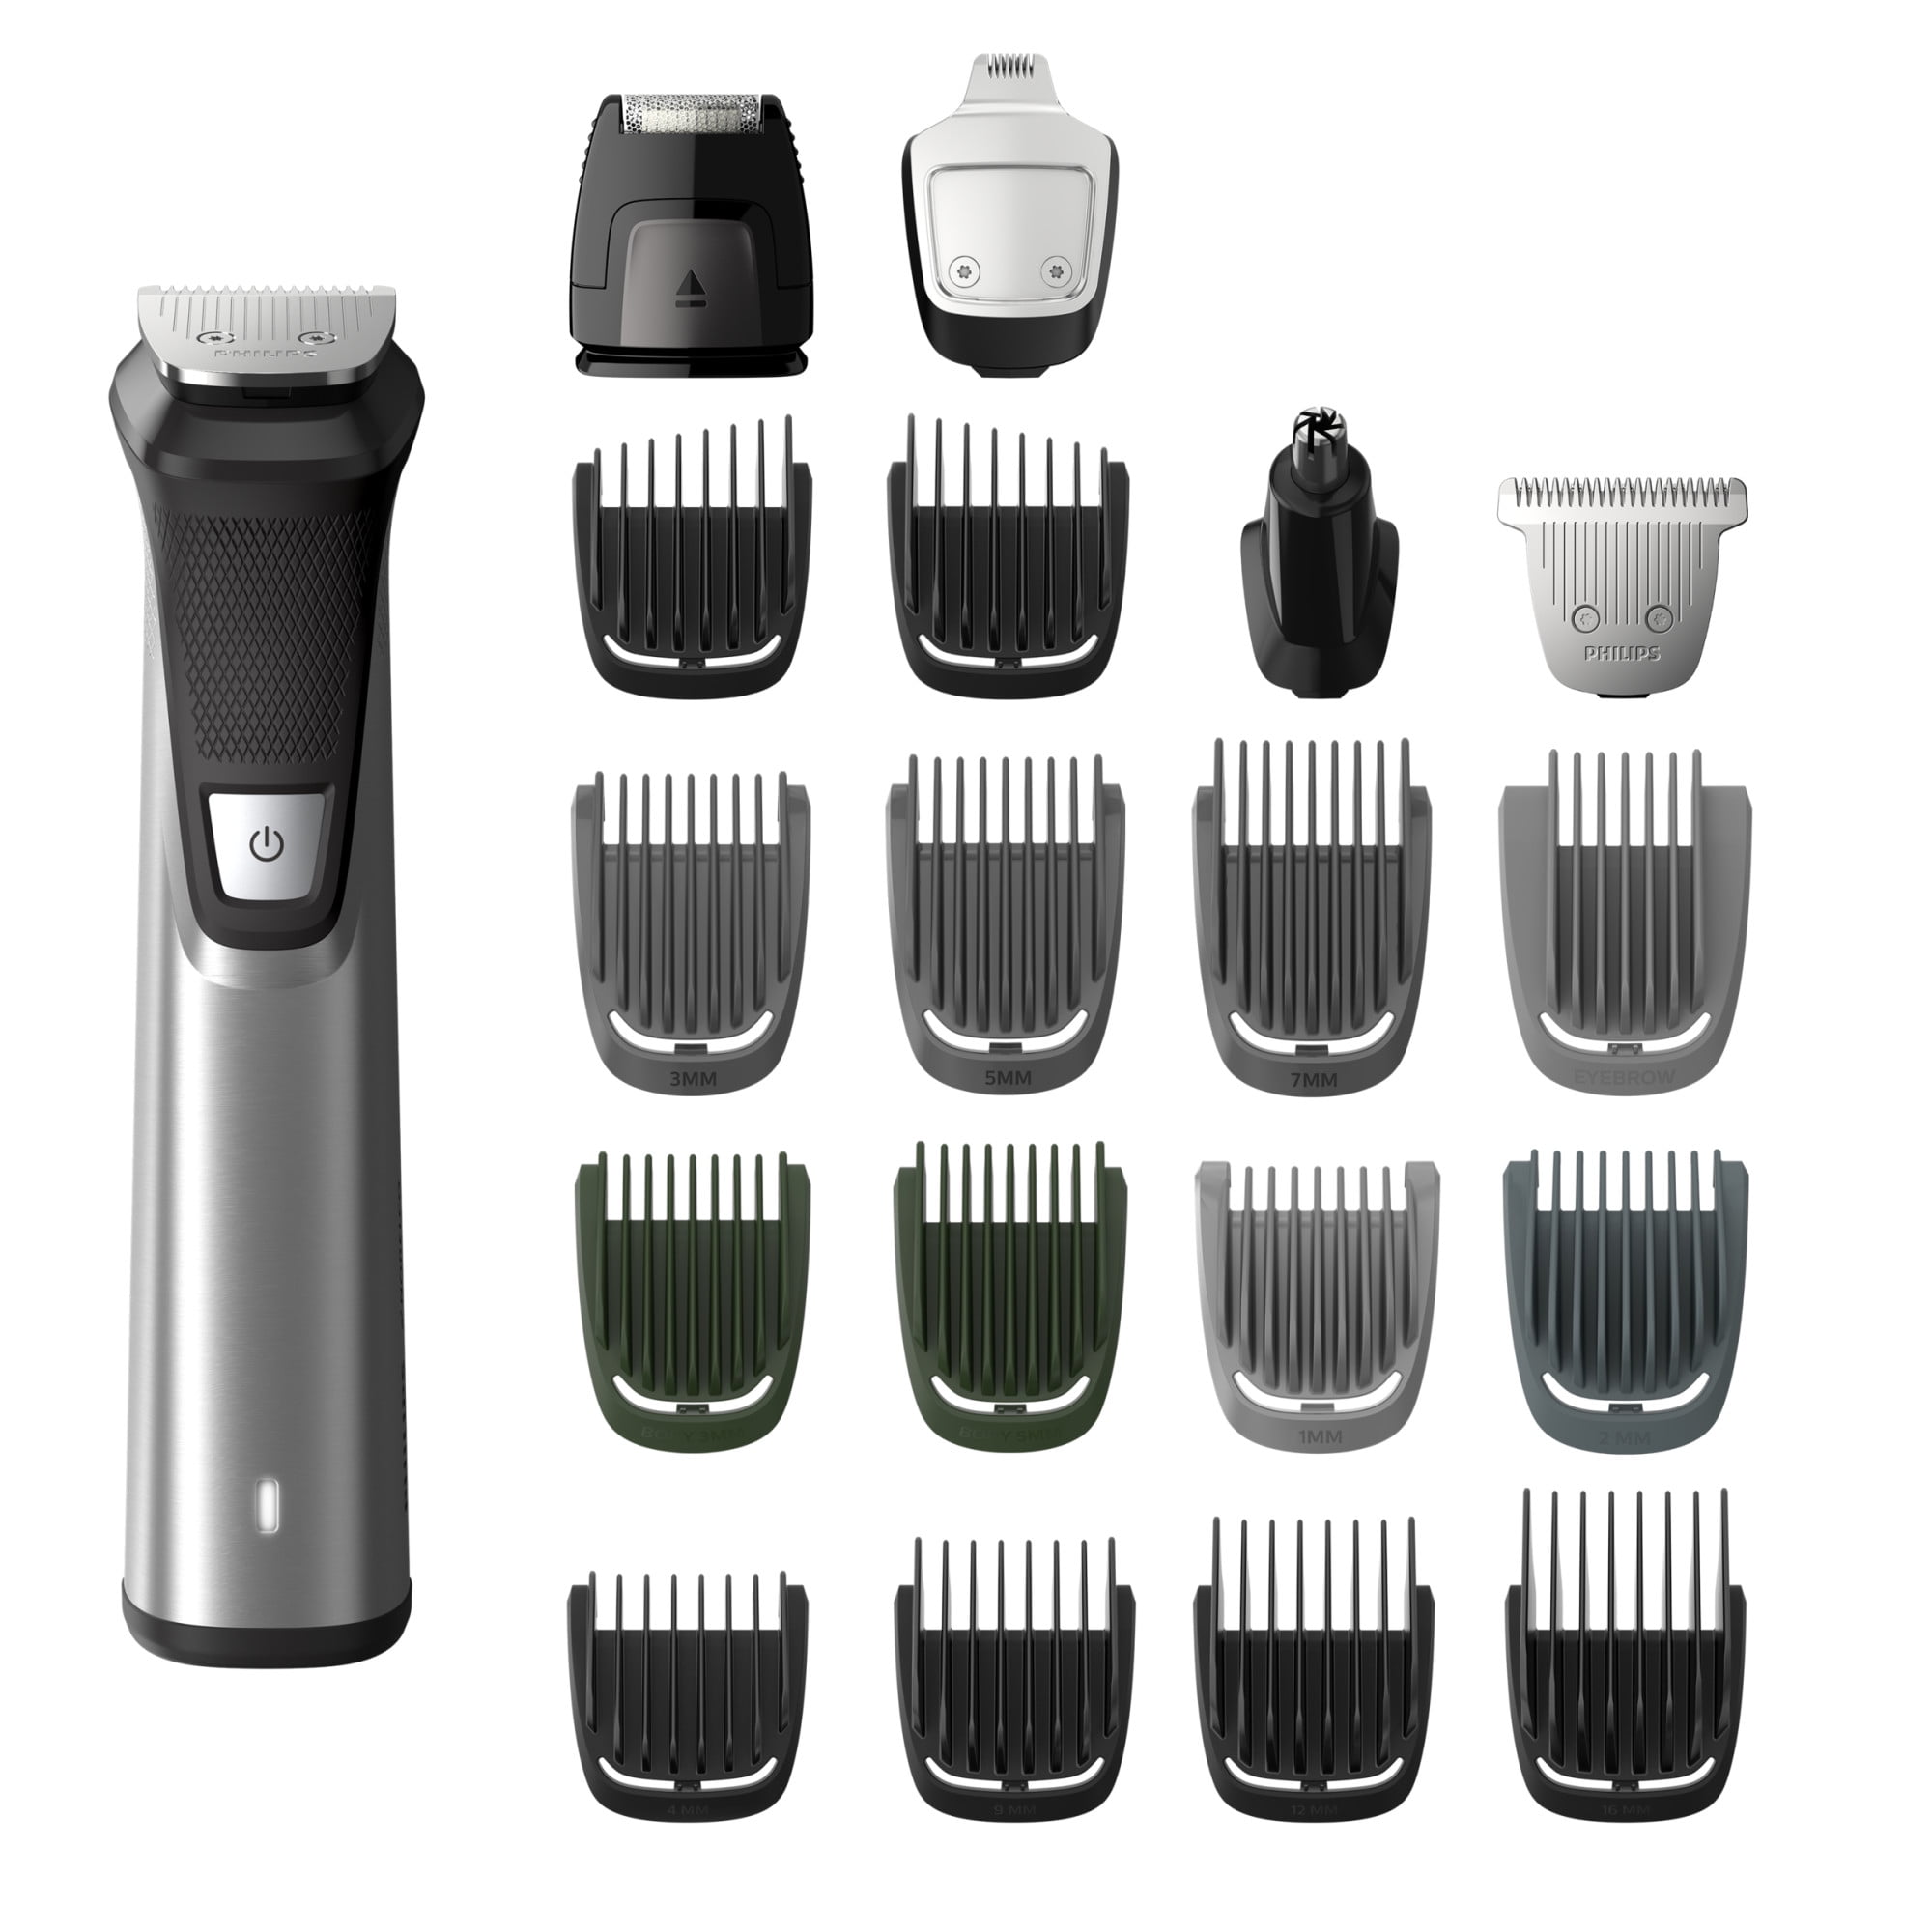 Turbulence Regulation Basement Philips Norelco Multigroom Series 7000 23 Piece Mens Grooming Kit, Trimmer  For Beard, Head, Body, and Face - No Blade Oil Needed, MG7750/49 -  Walmart.com